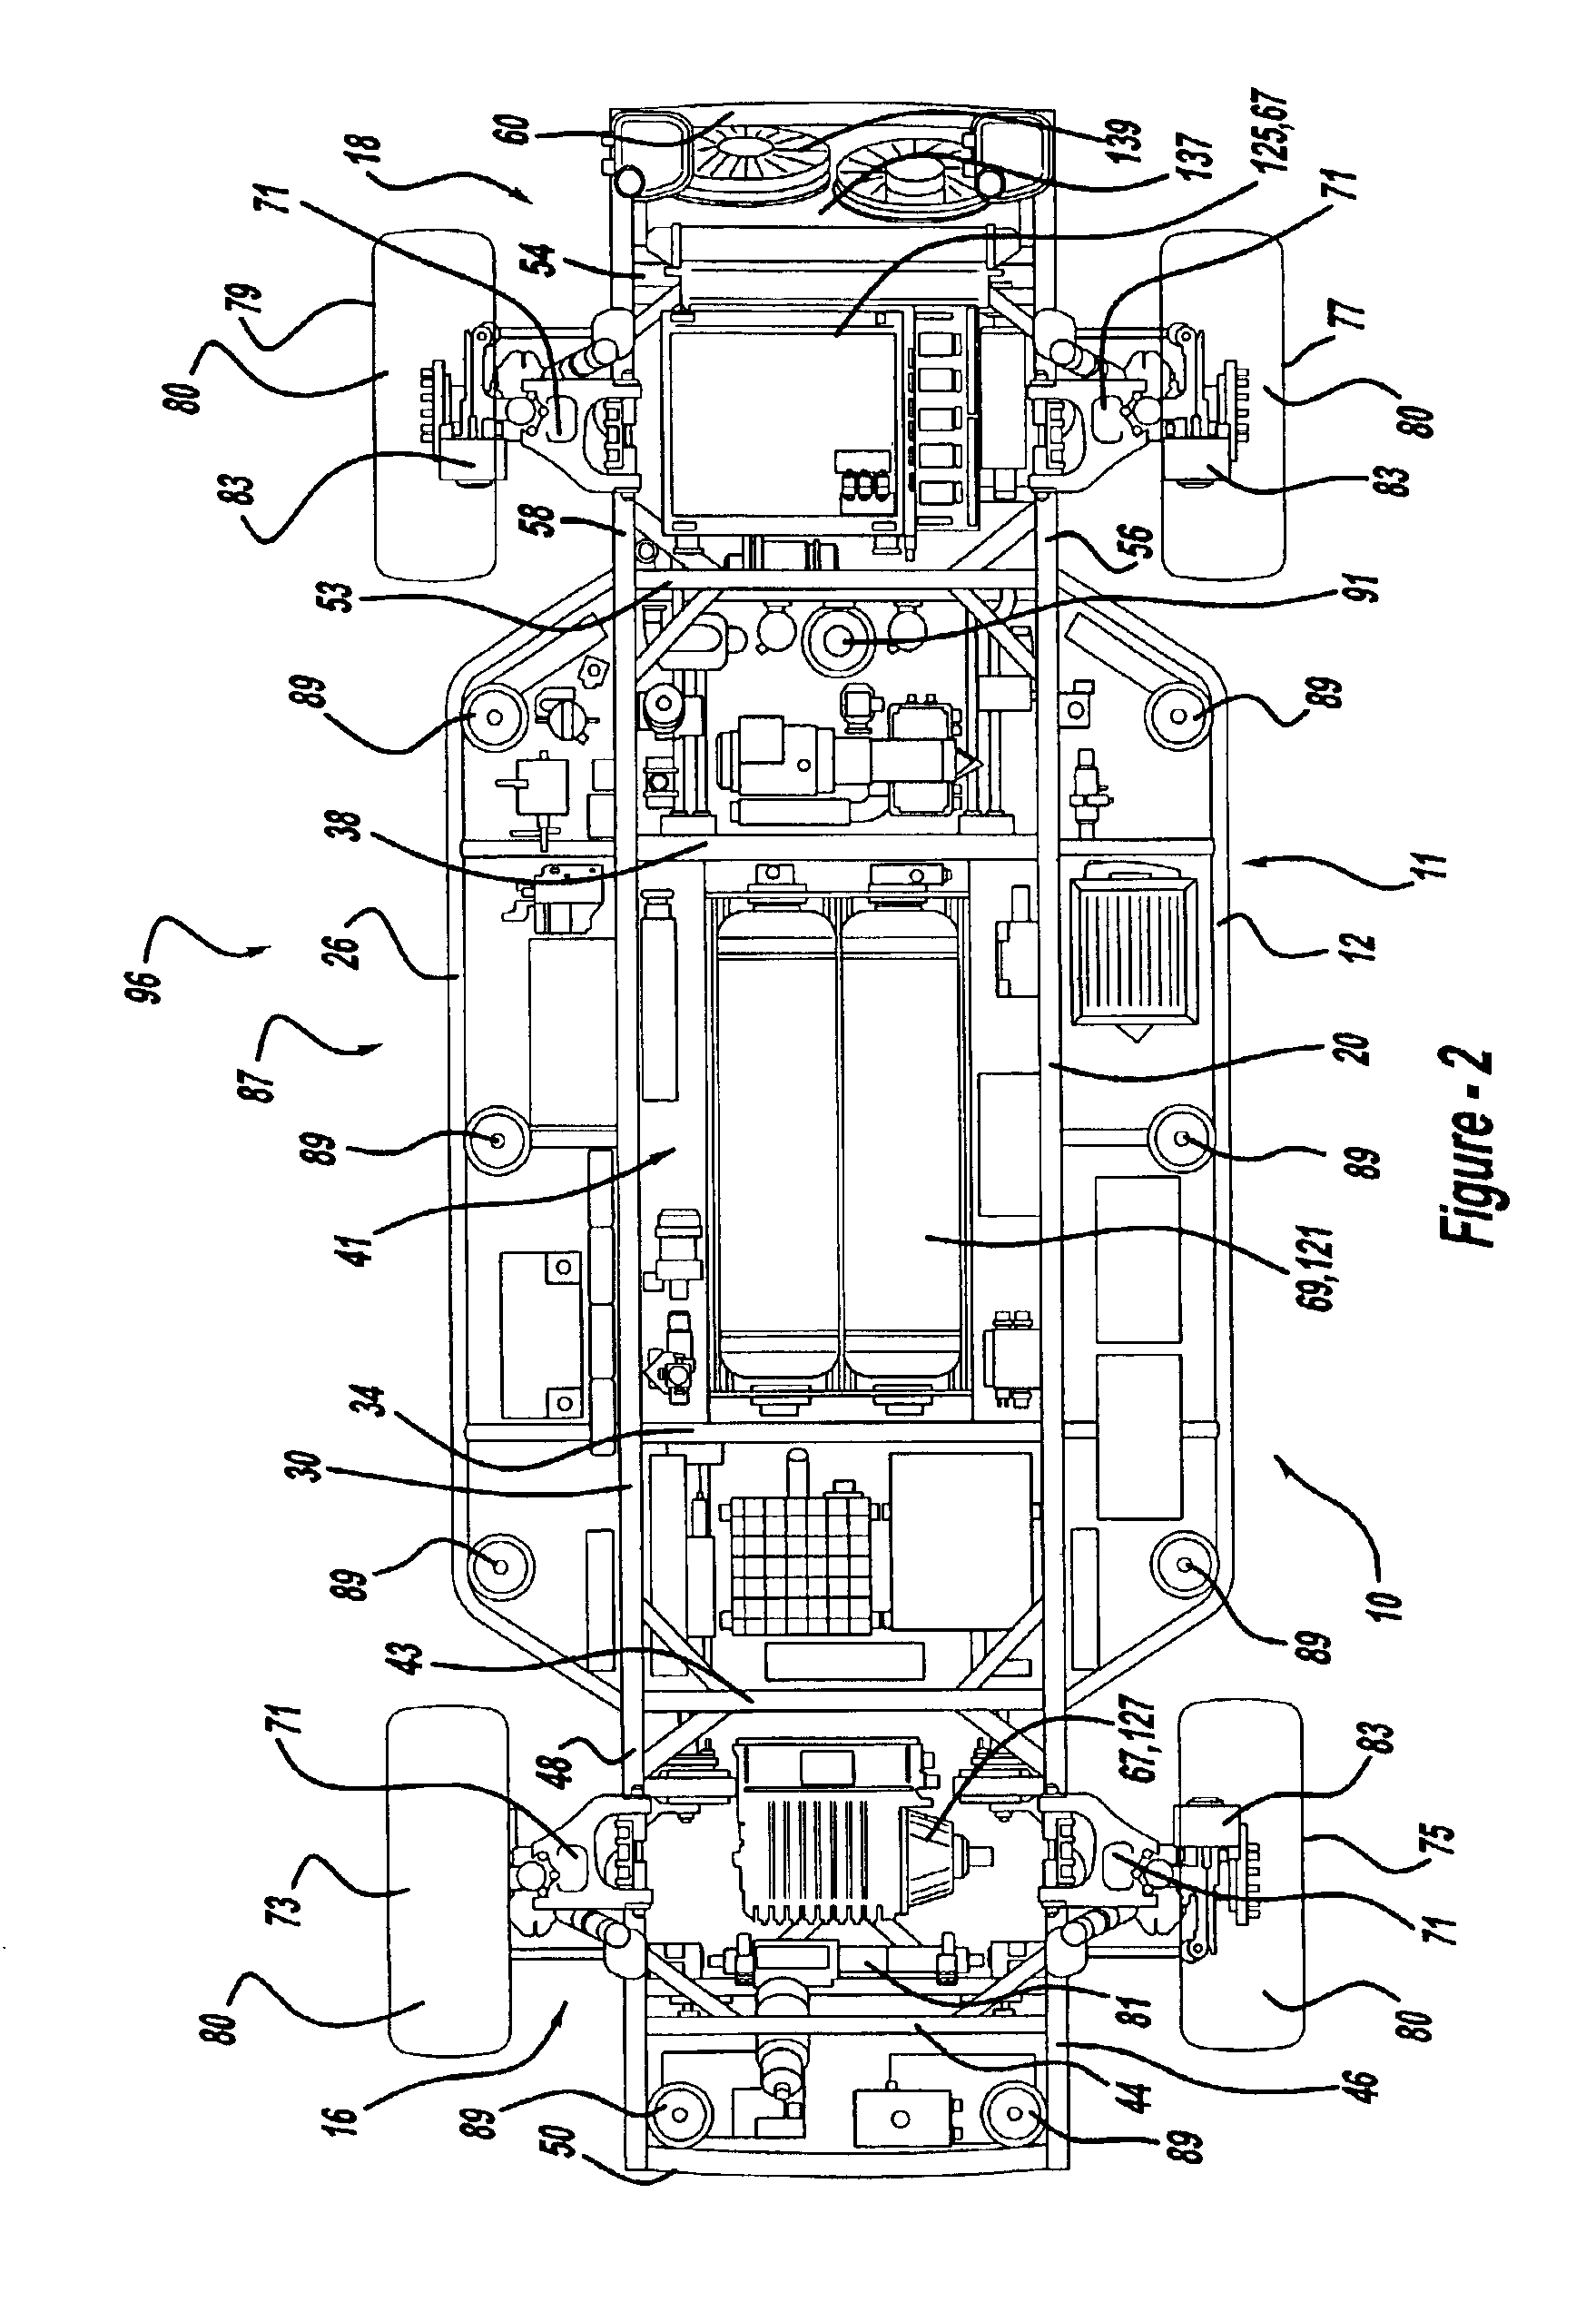 Chassis subassembly module and method for using same